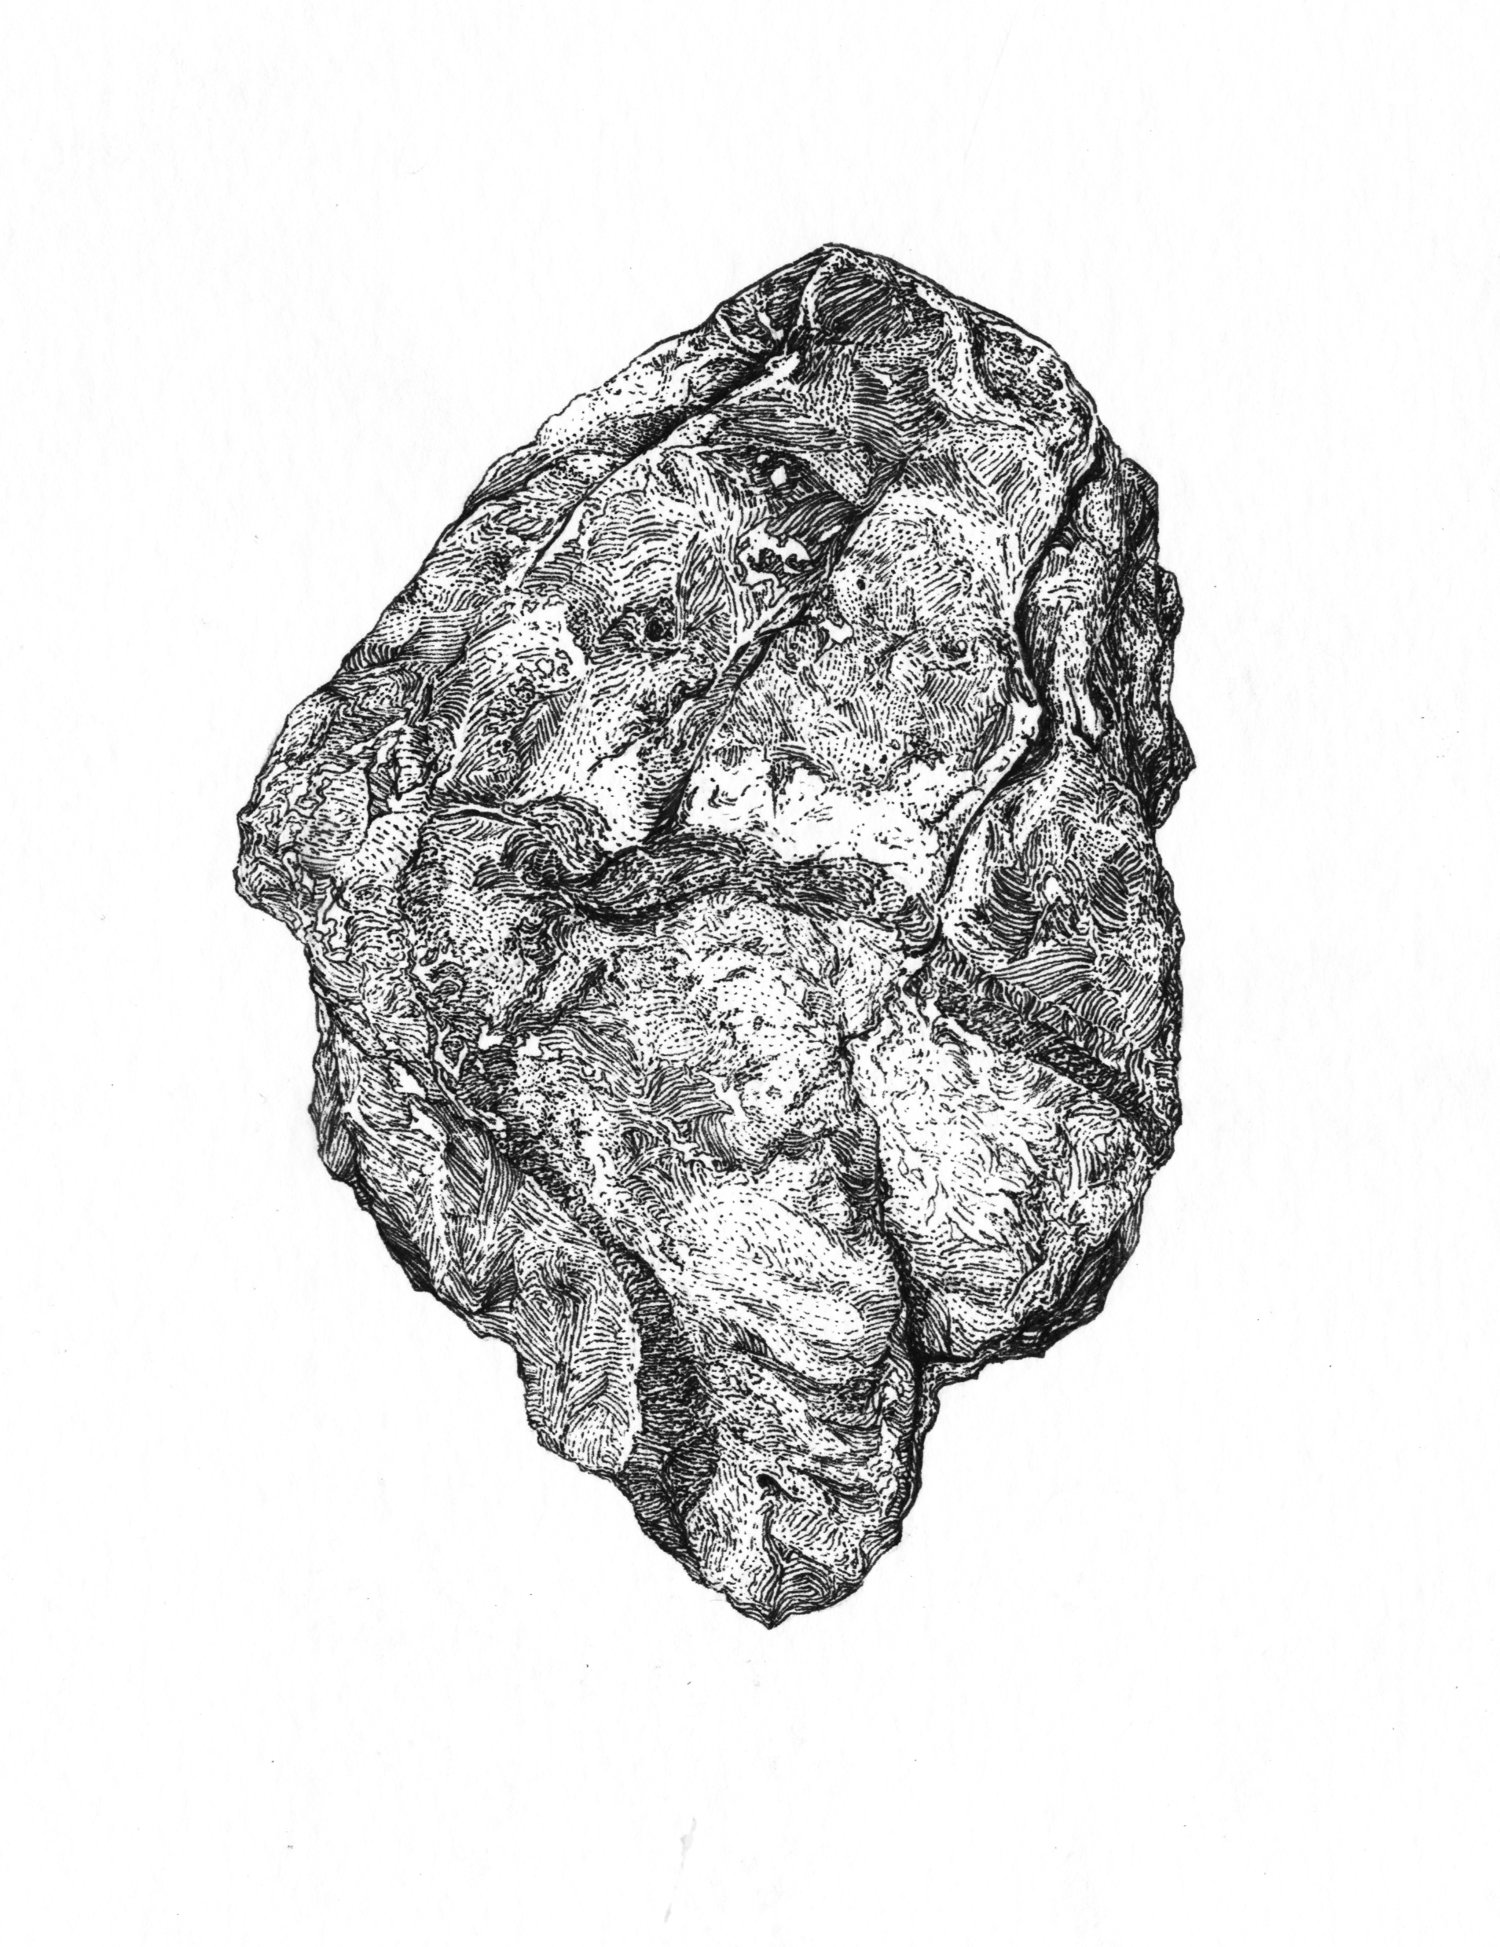 drawing of a small rock